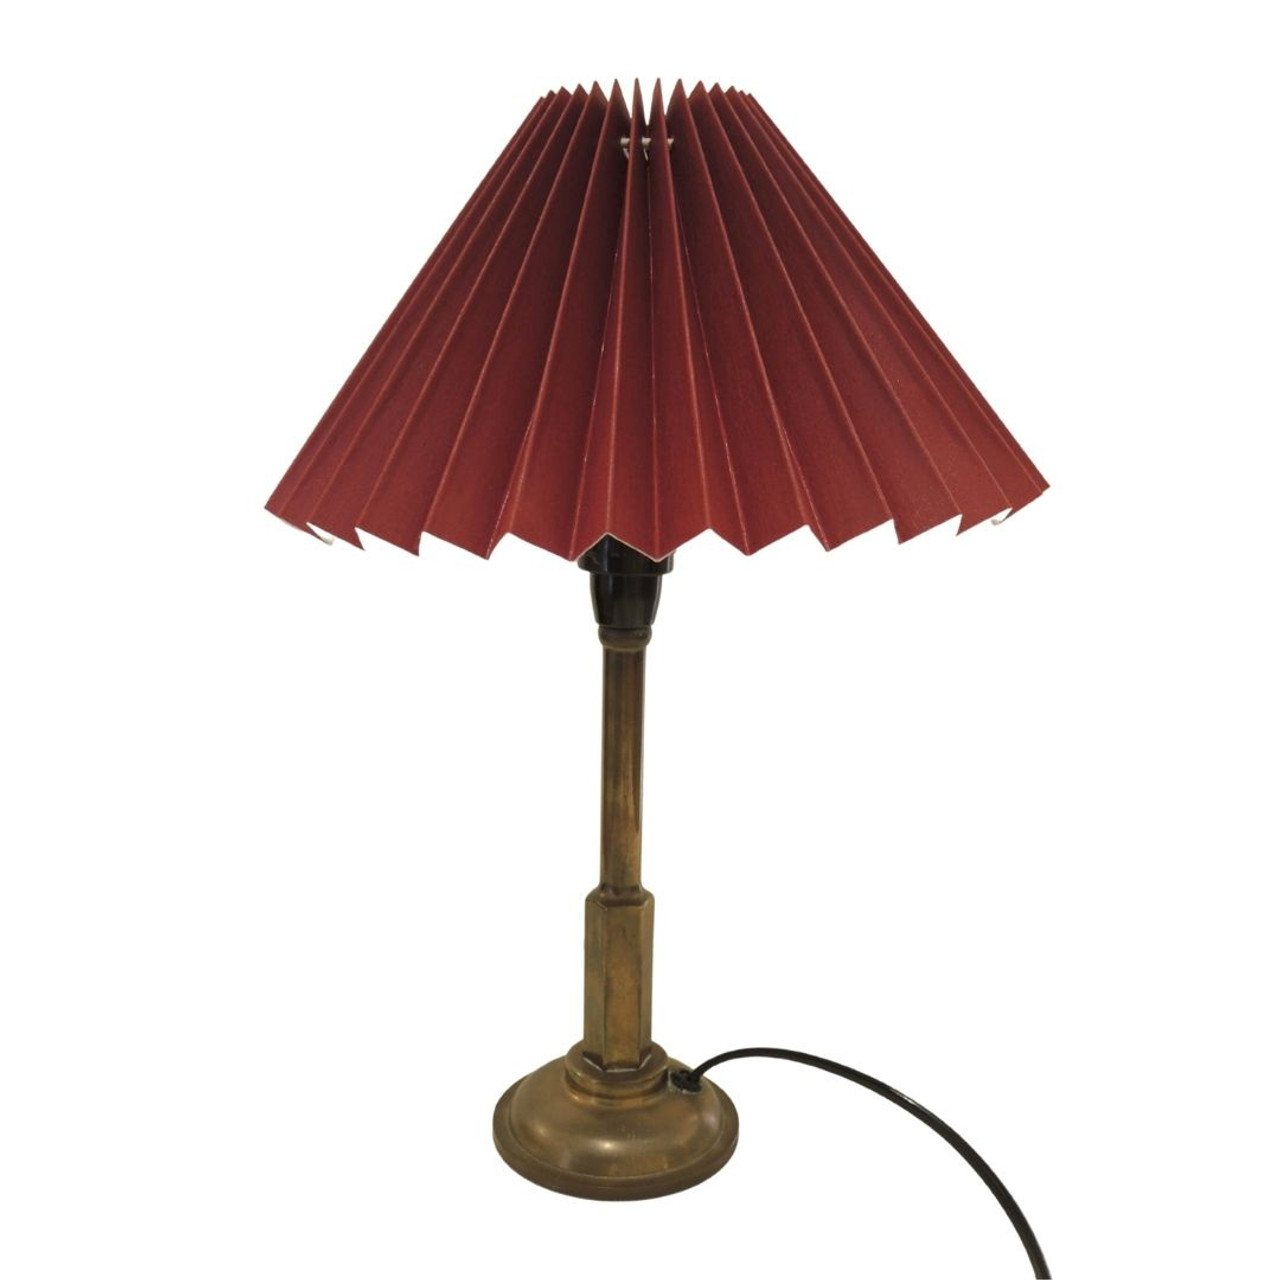 https://cdn11.bigcommerce.com/s-lfs7b9/images/stencil/1280x1280/products/2293/37850/Vintage_Brass_Table_or_Bedside_lamp_1__33585.1625378537.jpg?c=2